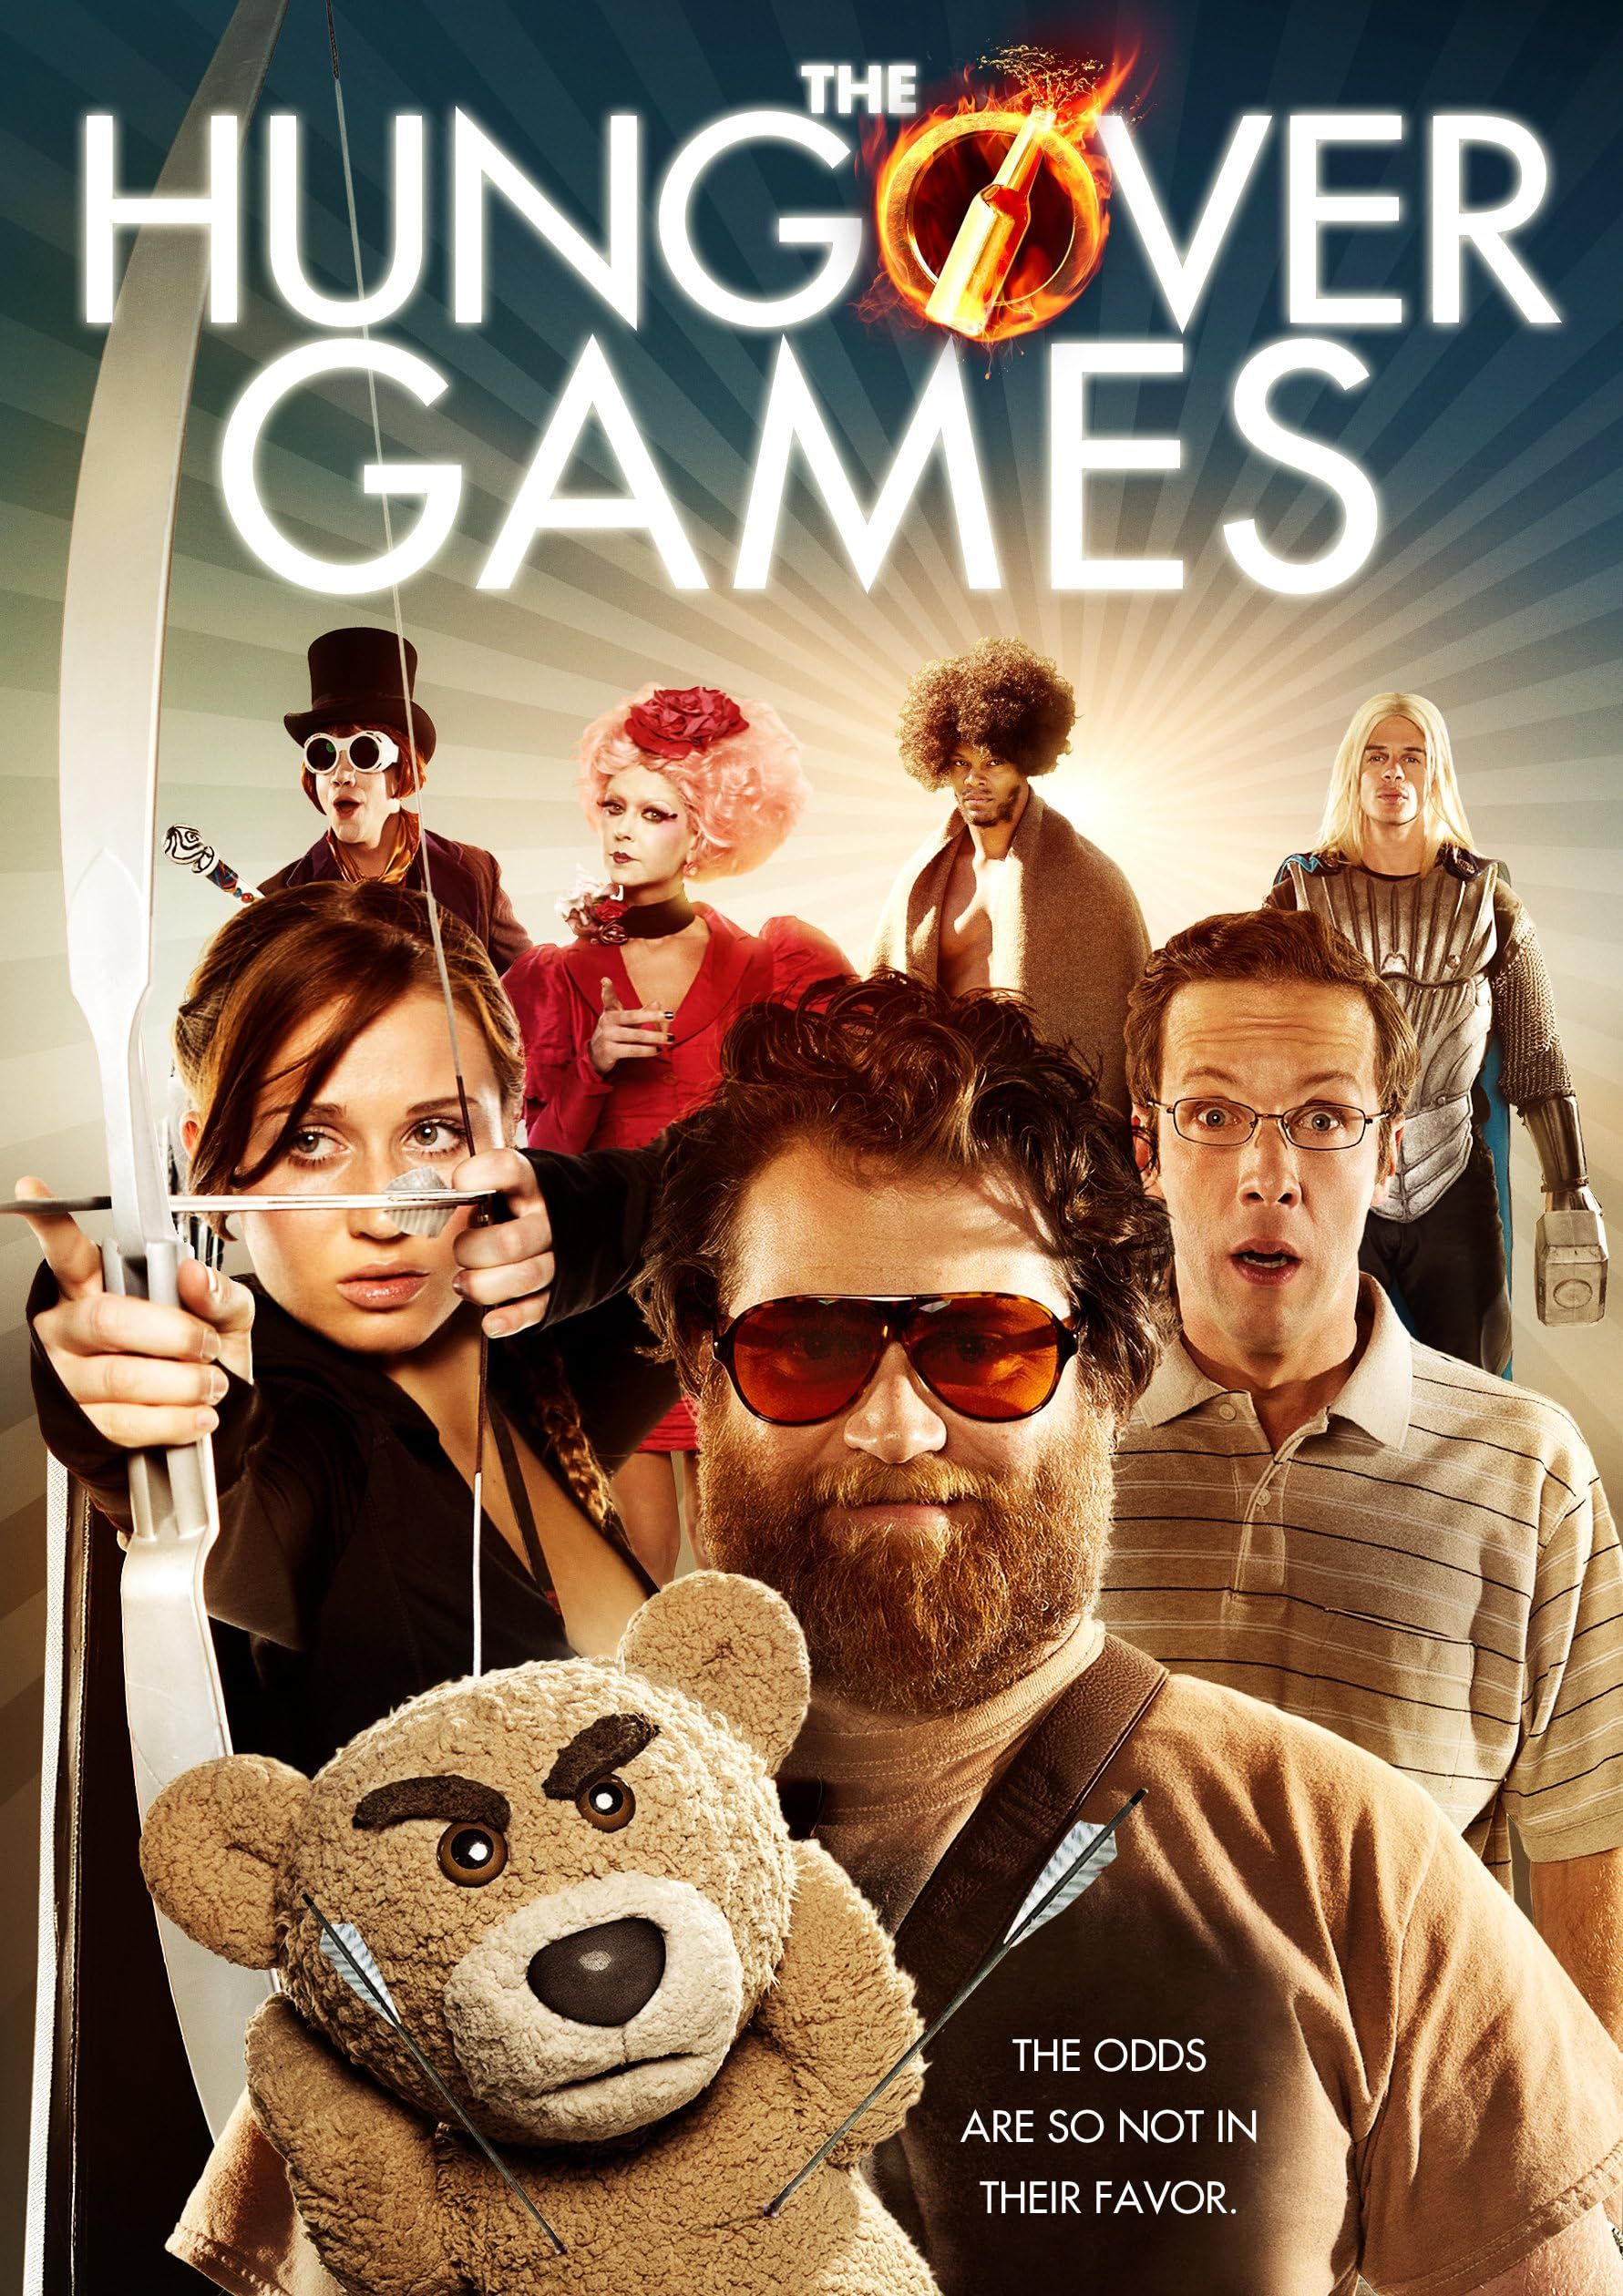 The Hungover Games (2014) Hindi Dubbed ORG BluRay Full Movie 720p 480p